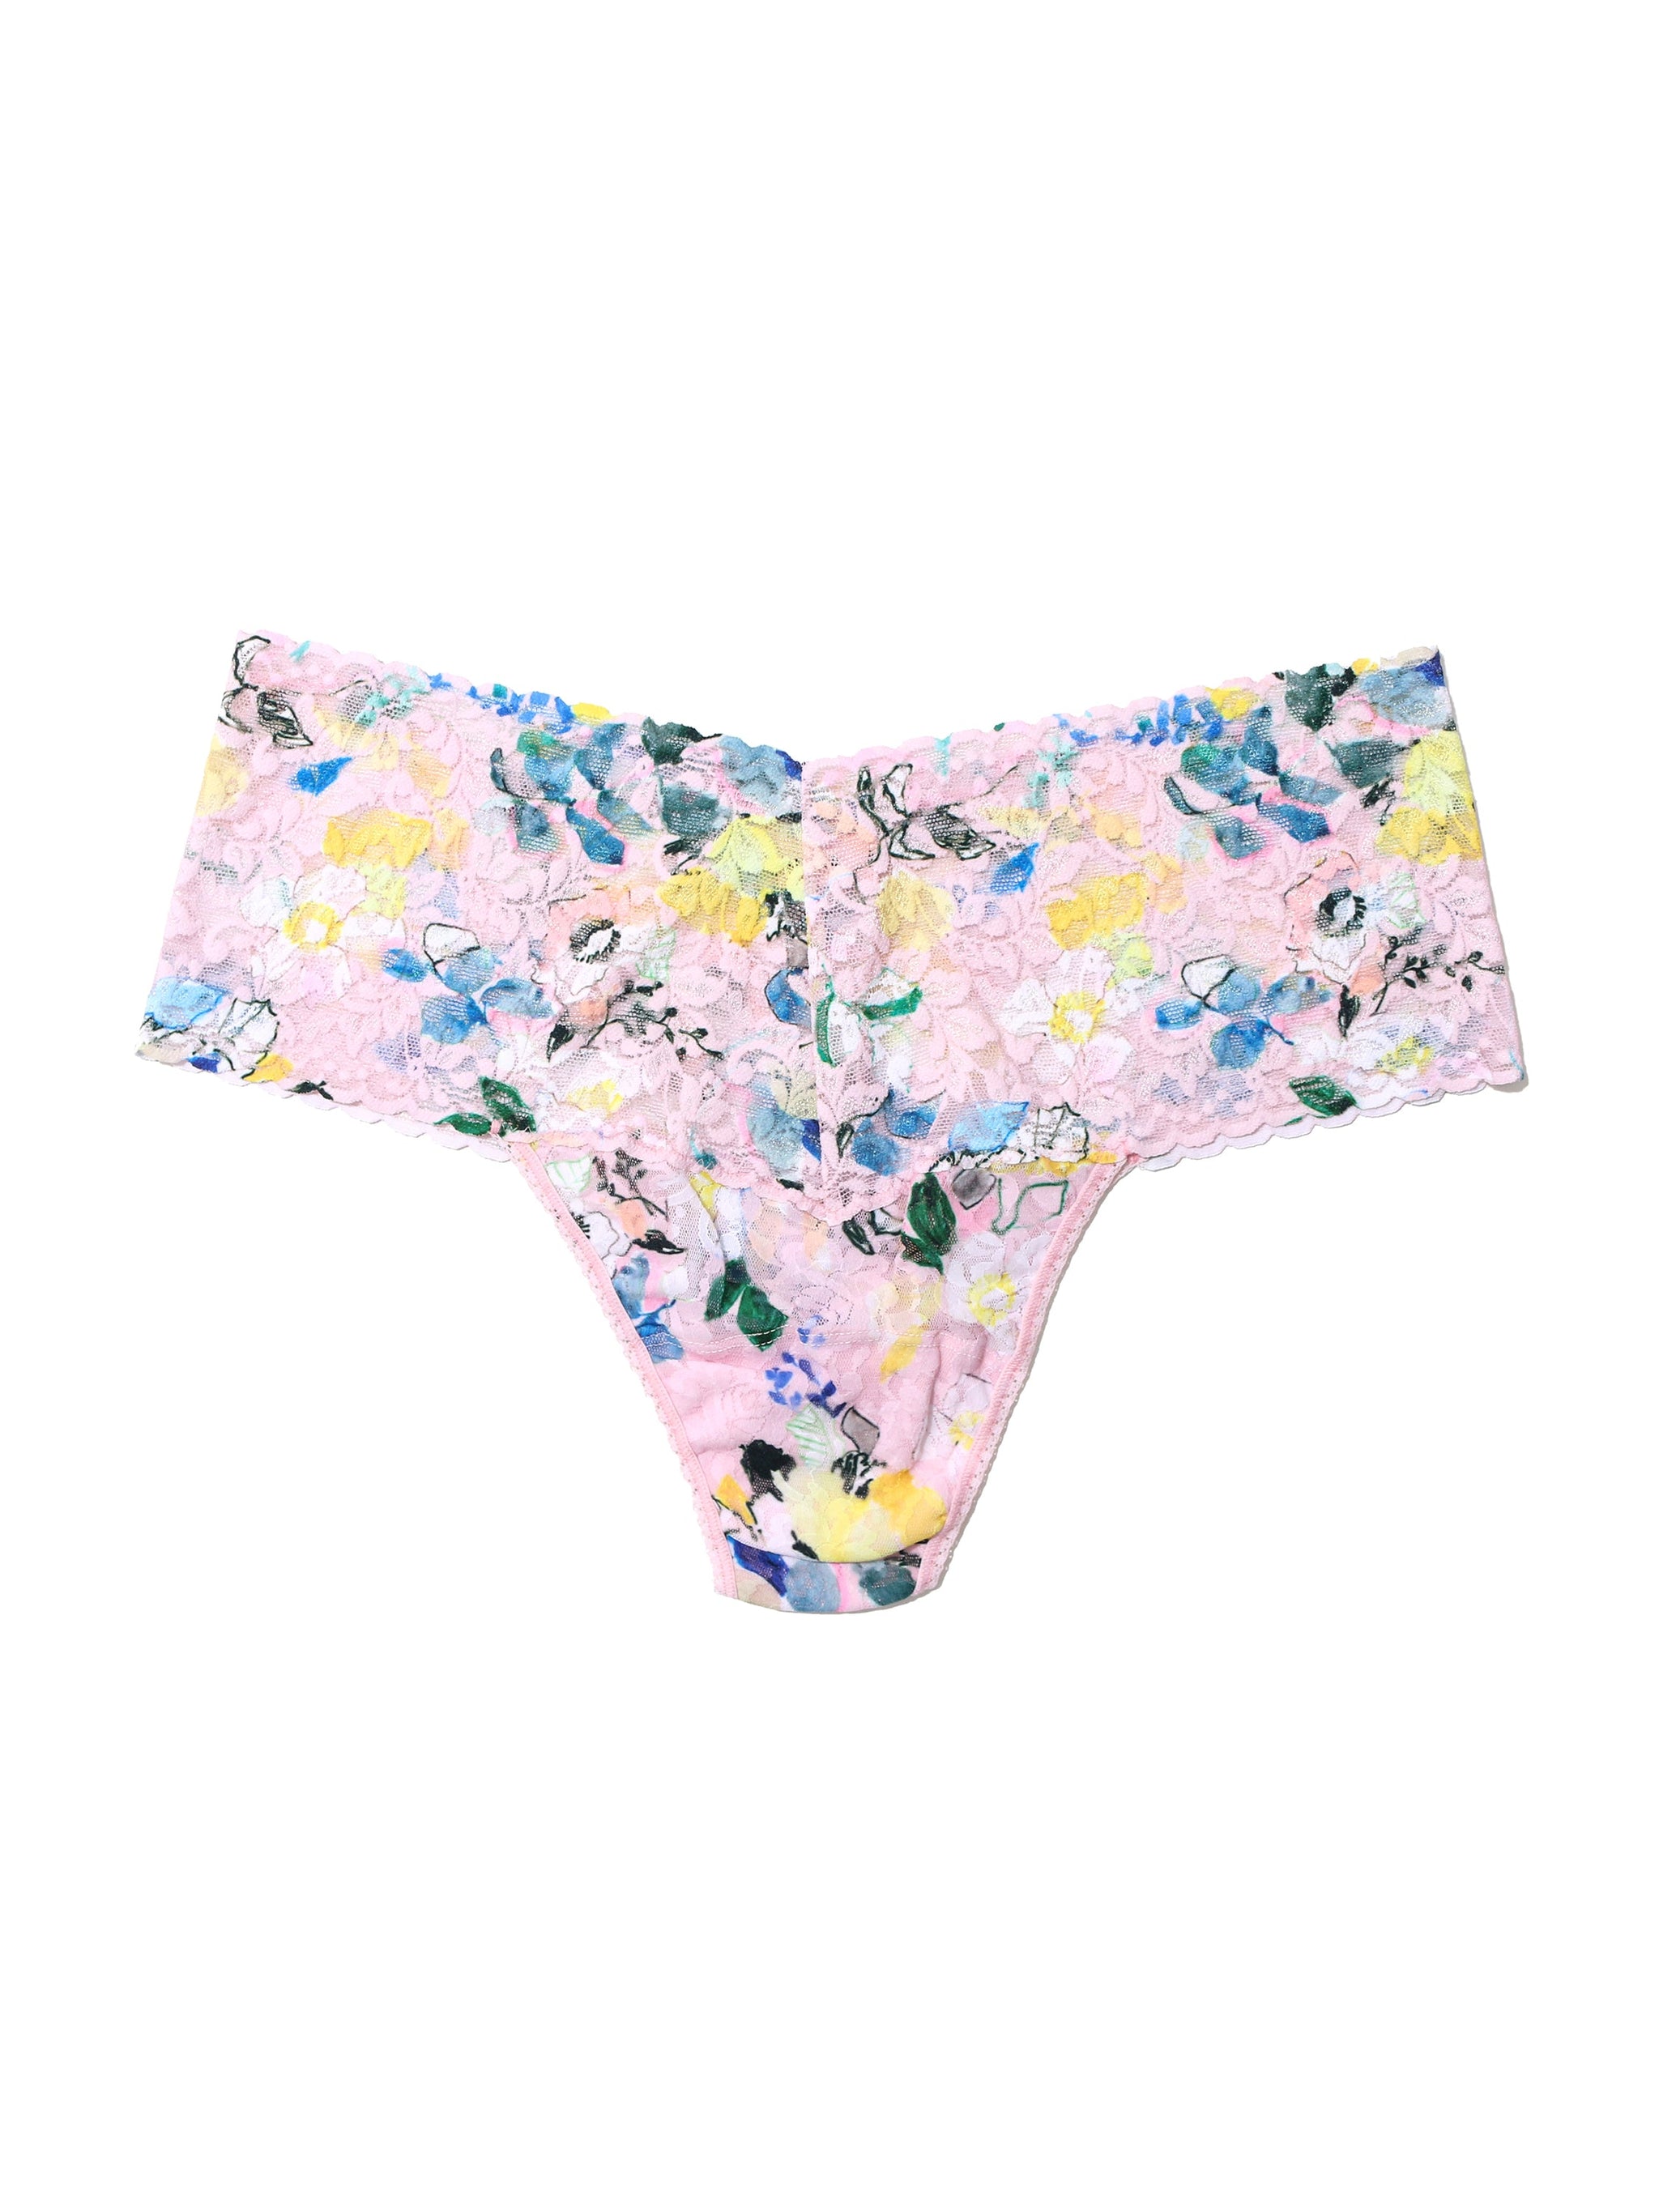 Plus Size Printed Retro Lace Thong Cannes You Believe It